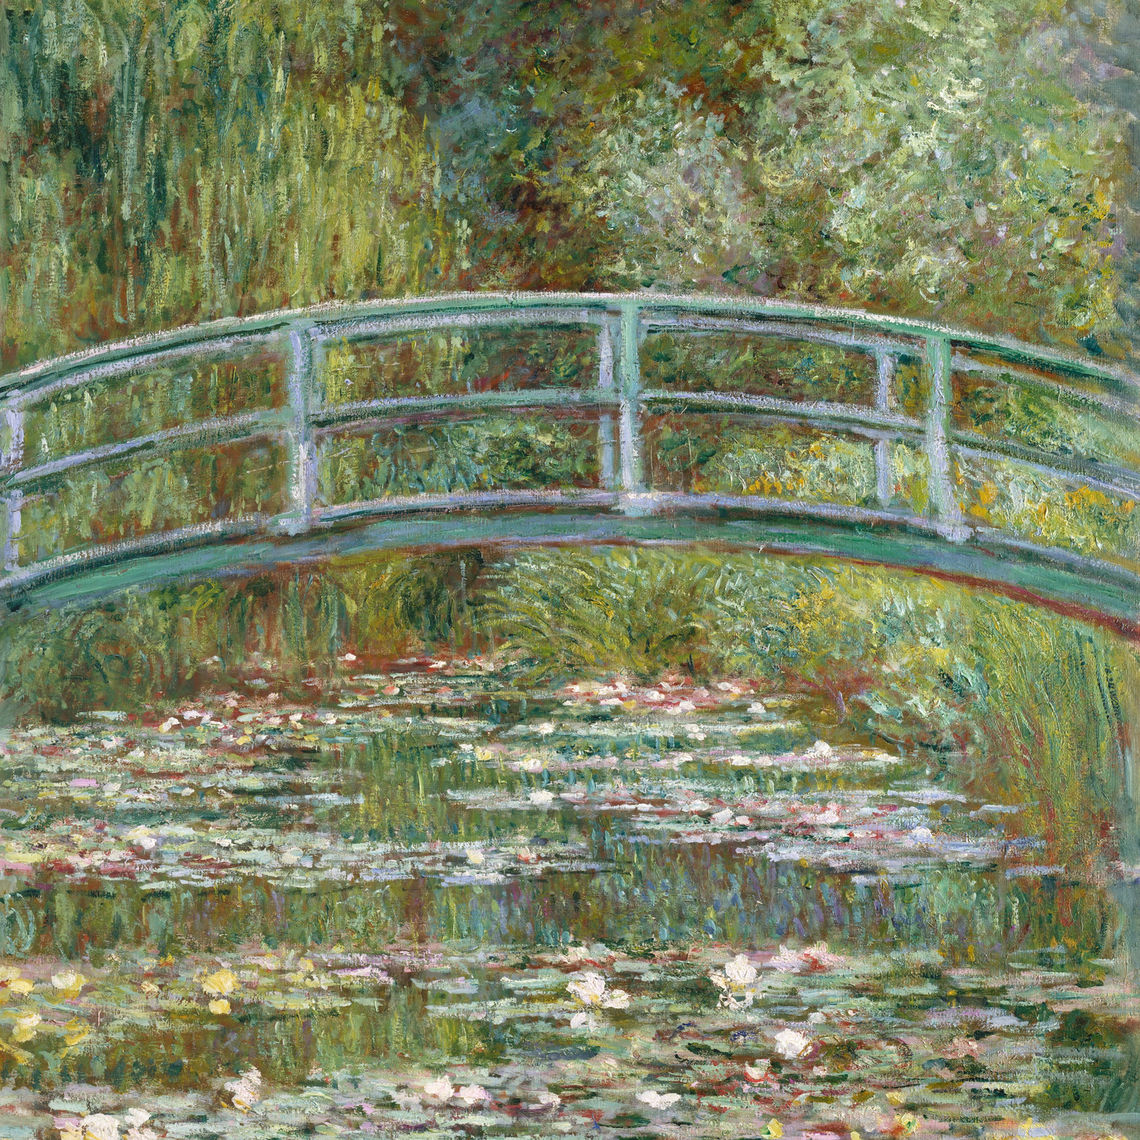 bridge over a pond of water lilies 1899